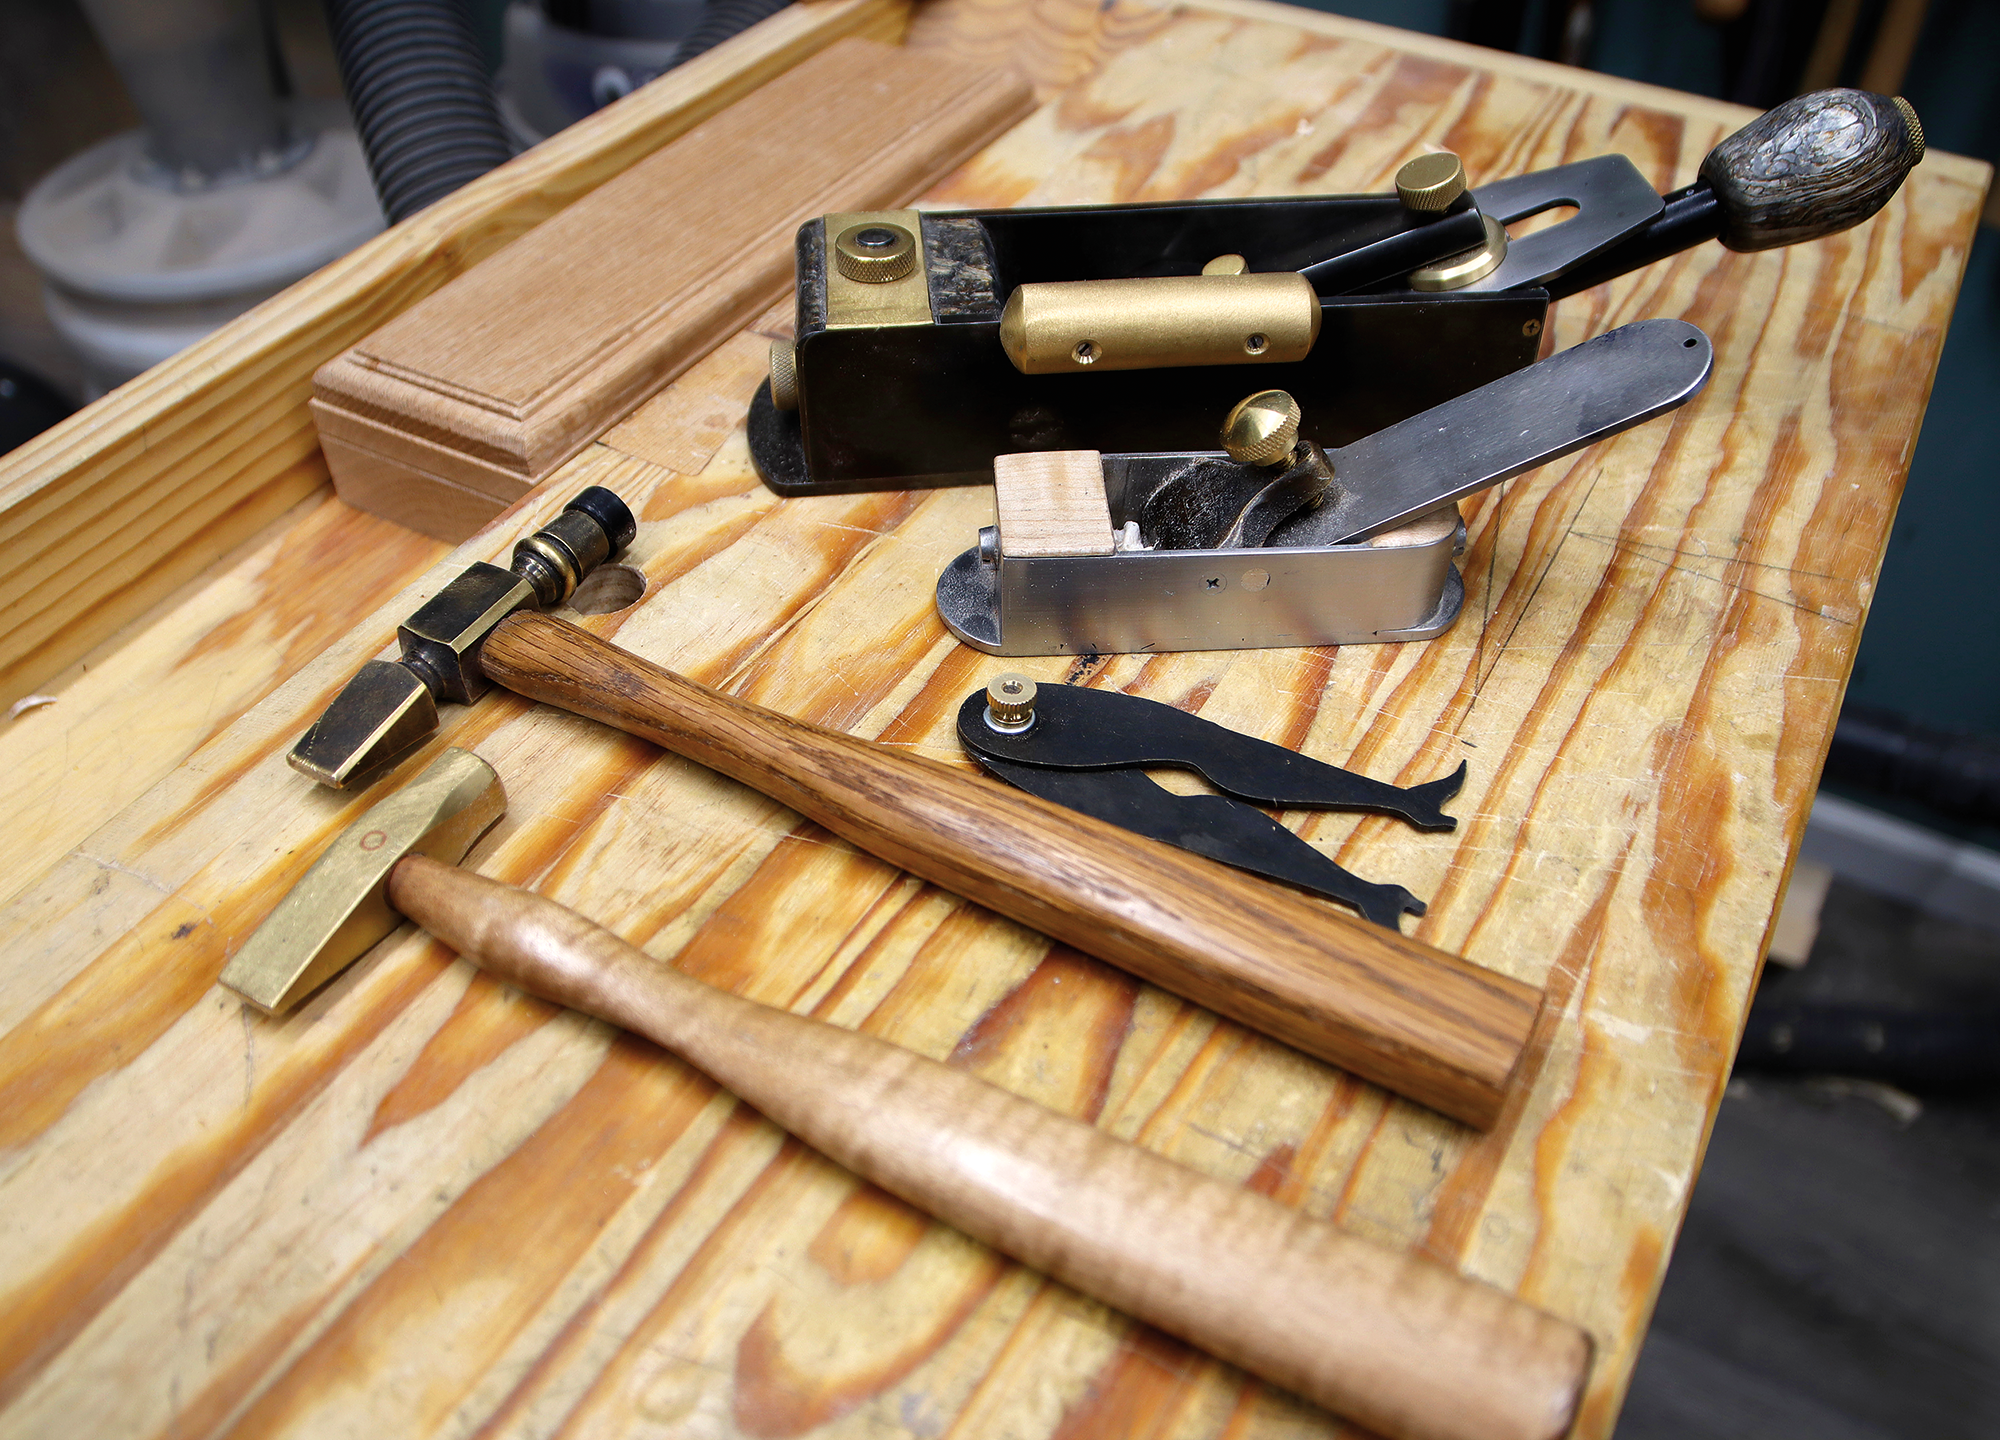 Meyer made these tools, including steel hand planes, a pair of Dancing Master calipers, and brass-head hammers.